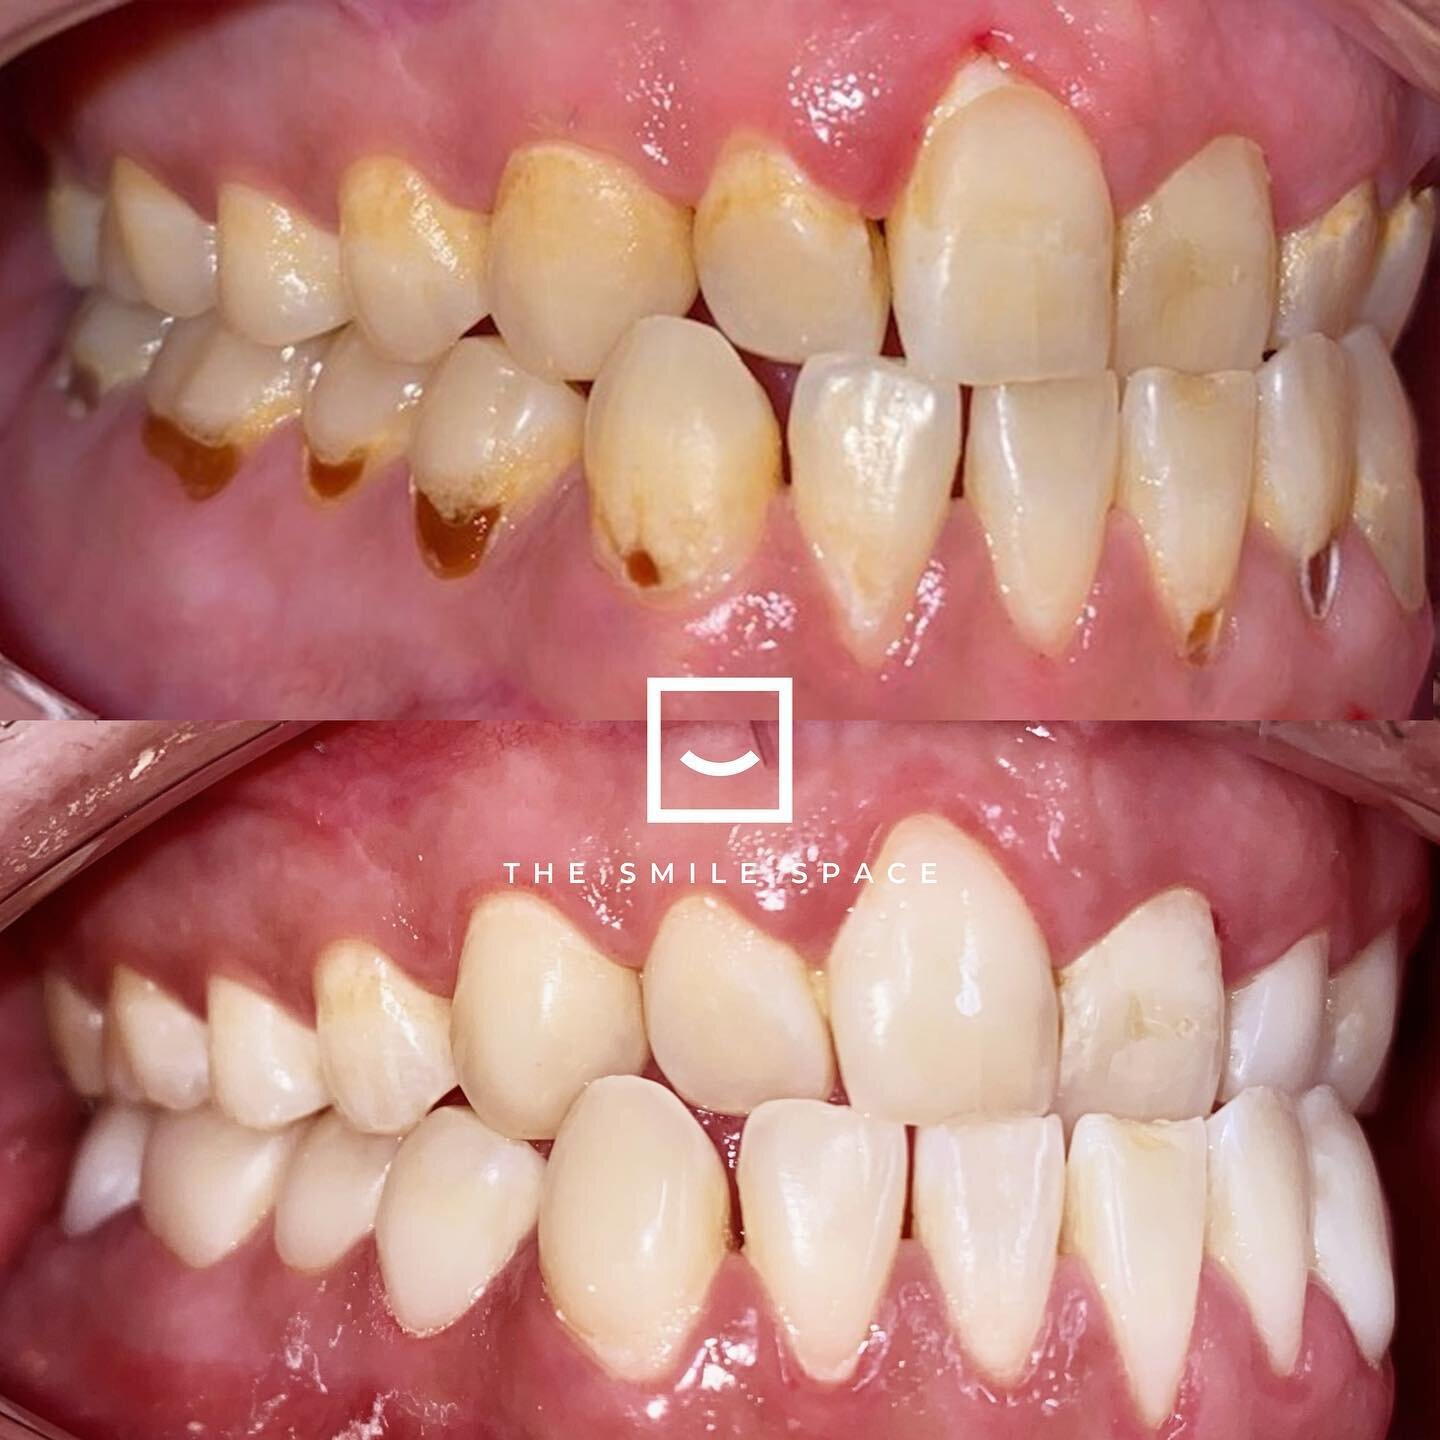 This patient thought his teeth were a lost cause, but Dr. Daniel was able to rejuvenate his smile with beautiful #classv #composite #fillings. 

#seattledentist #cavities #belltowndentist #dentist #3msoflex #dentistry #orthodontics #dentaloffice #com